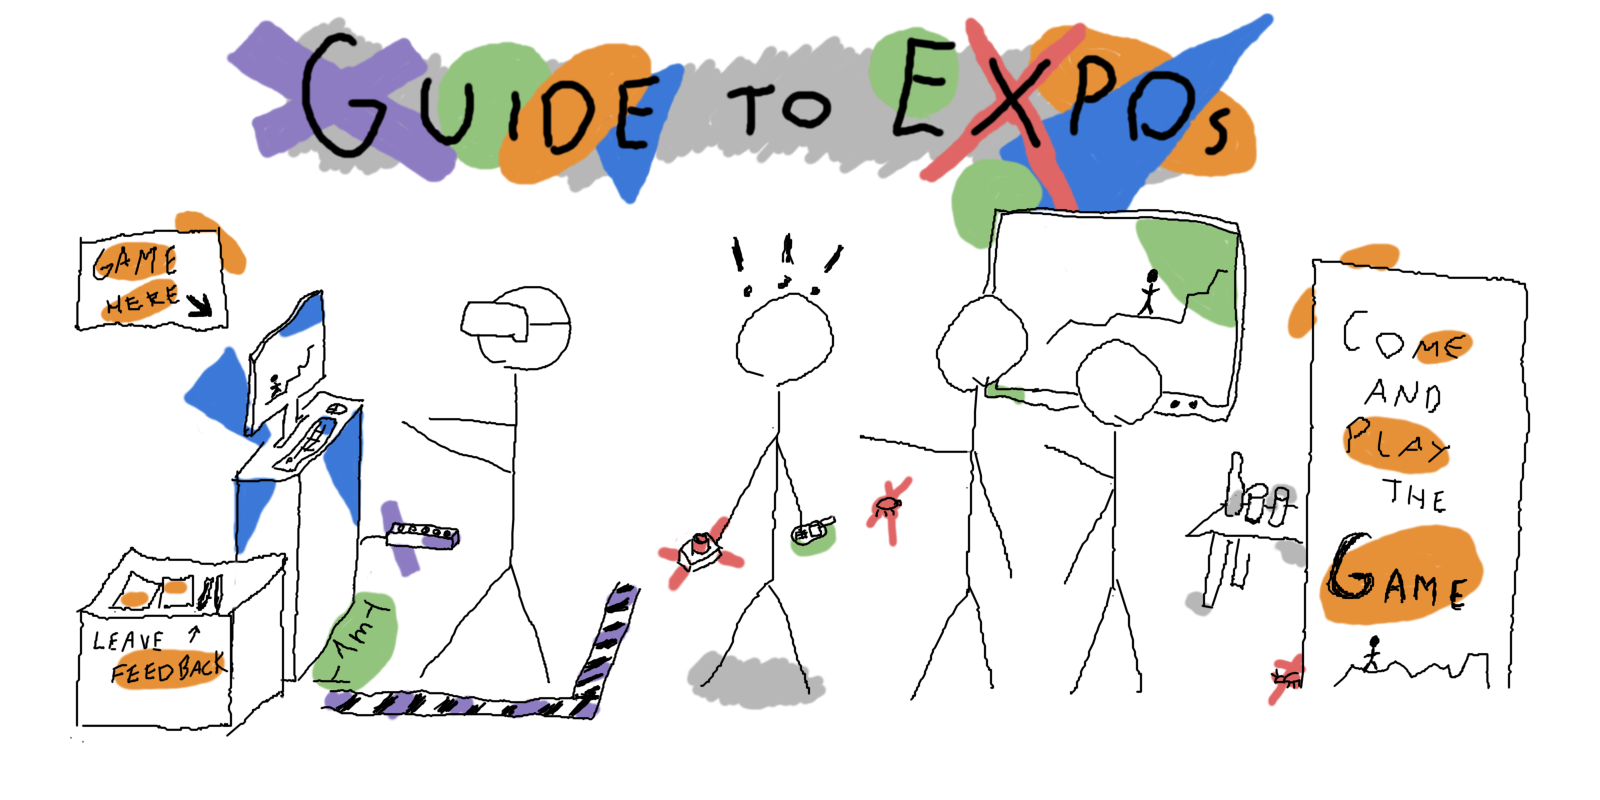 Guide to Expos